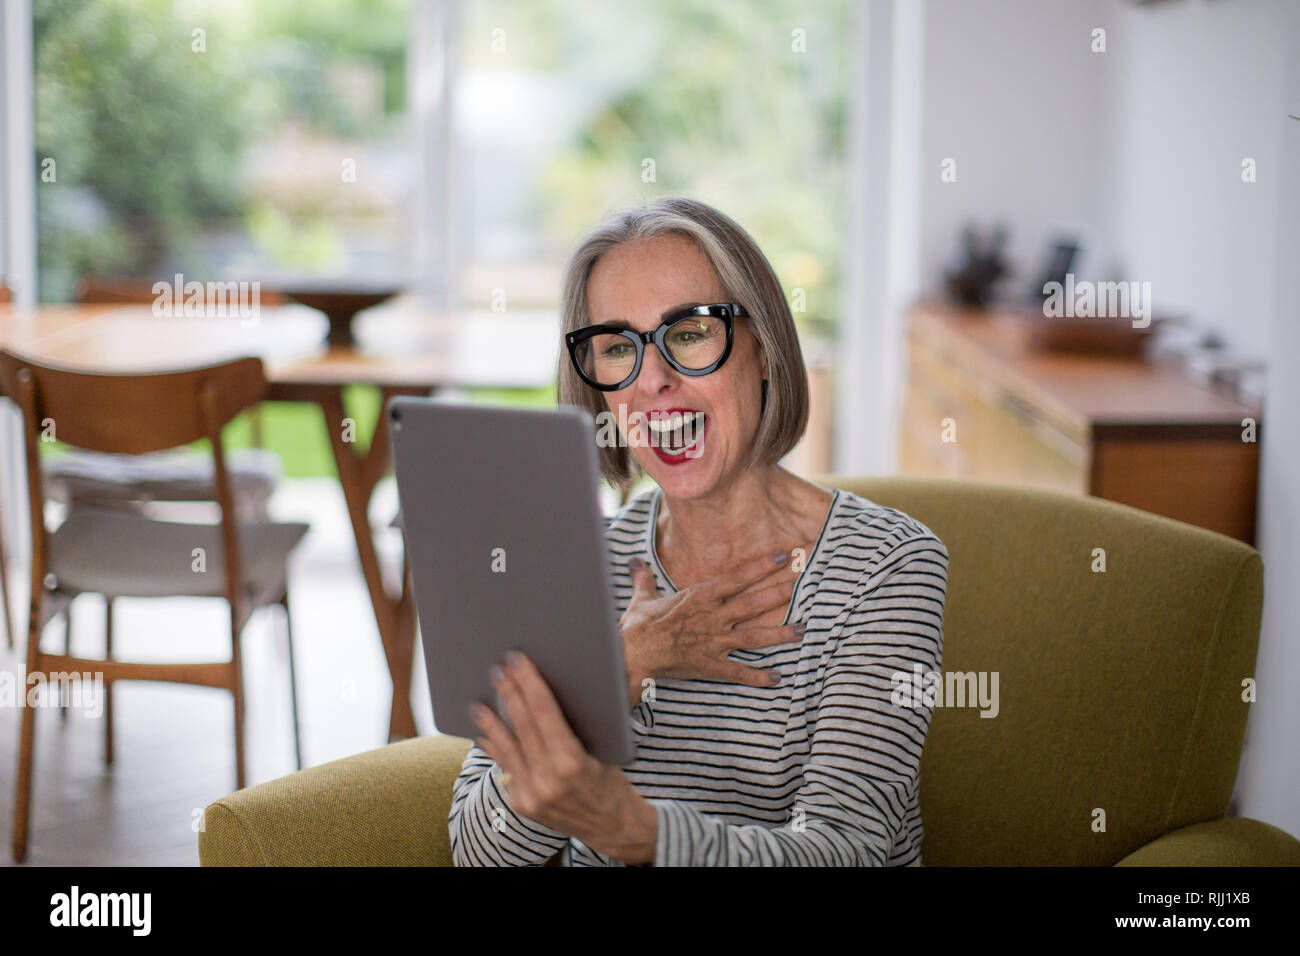 Mature adult female on a videocall to family Stock Photo